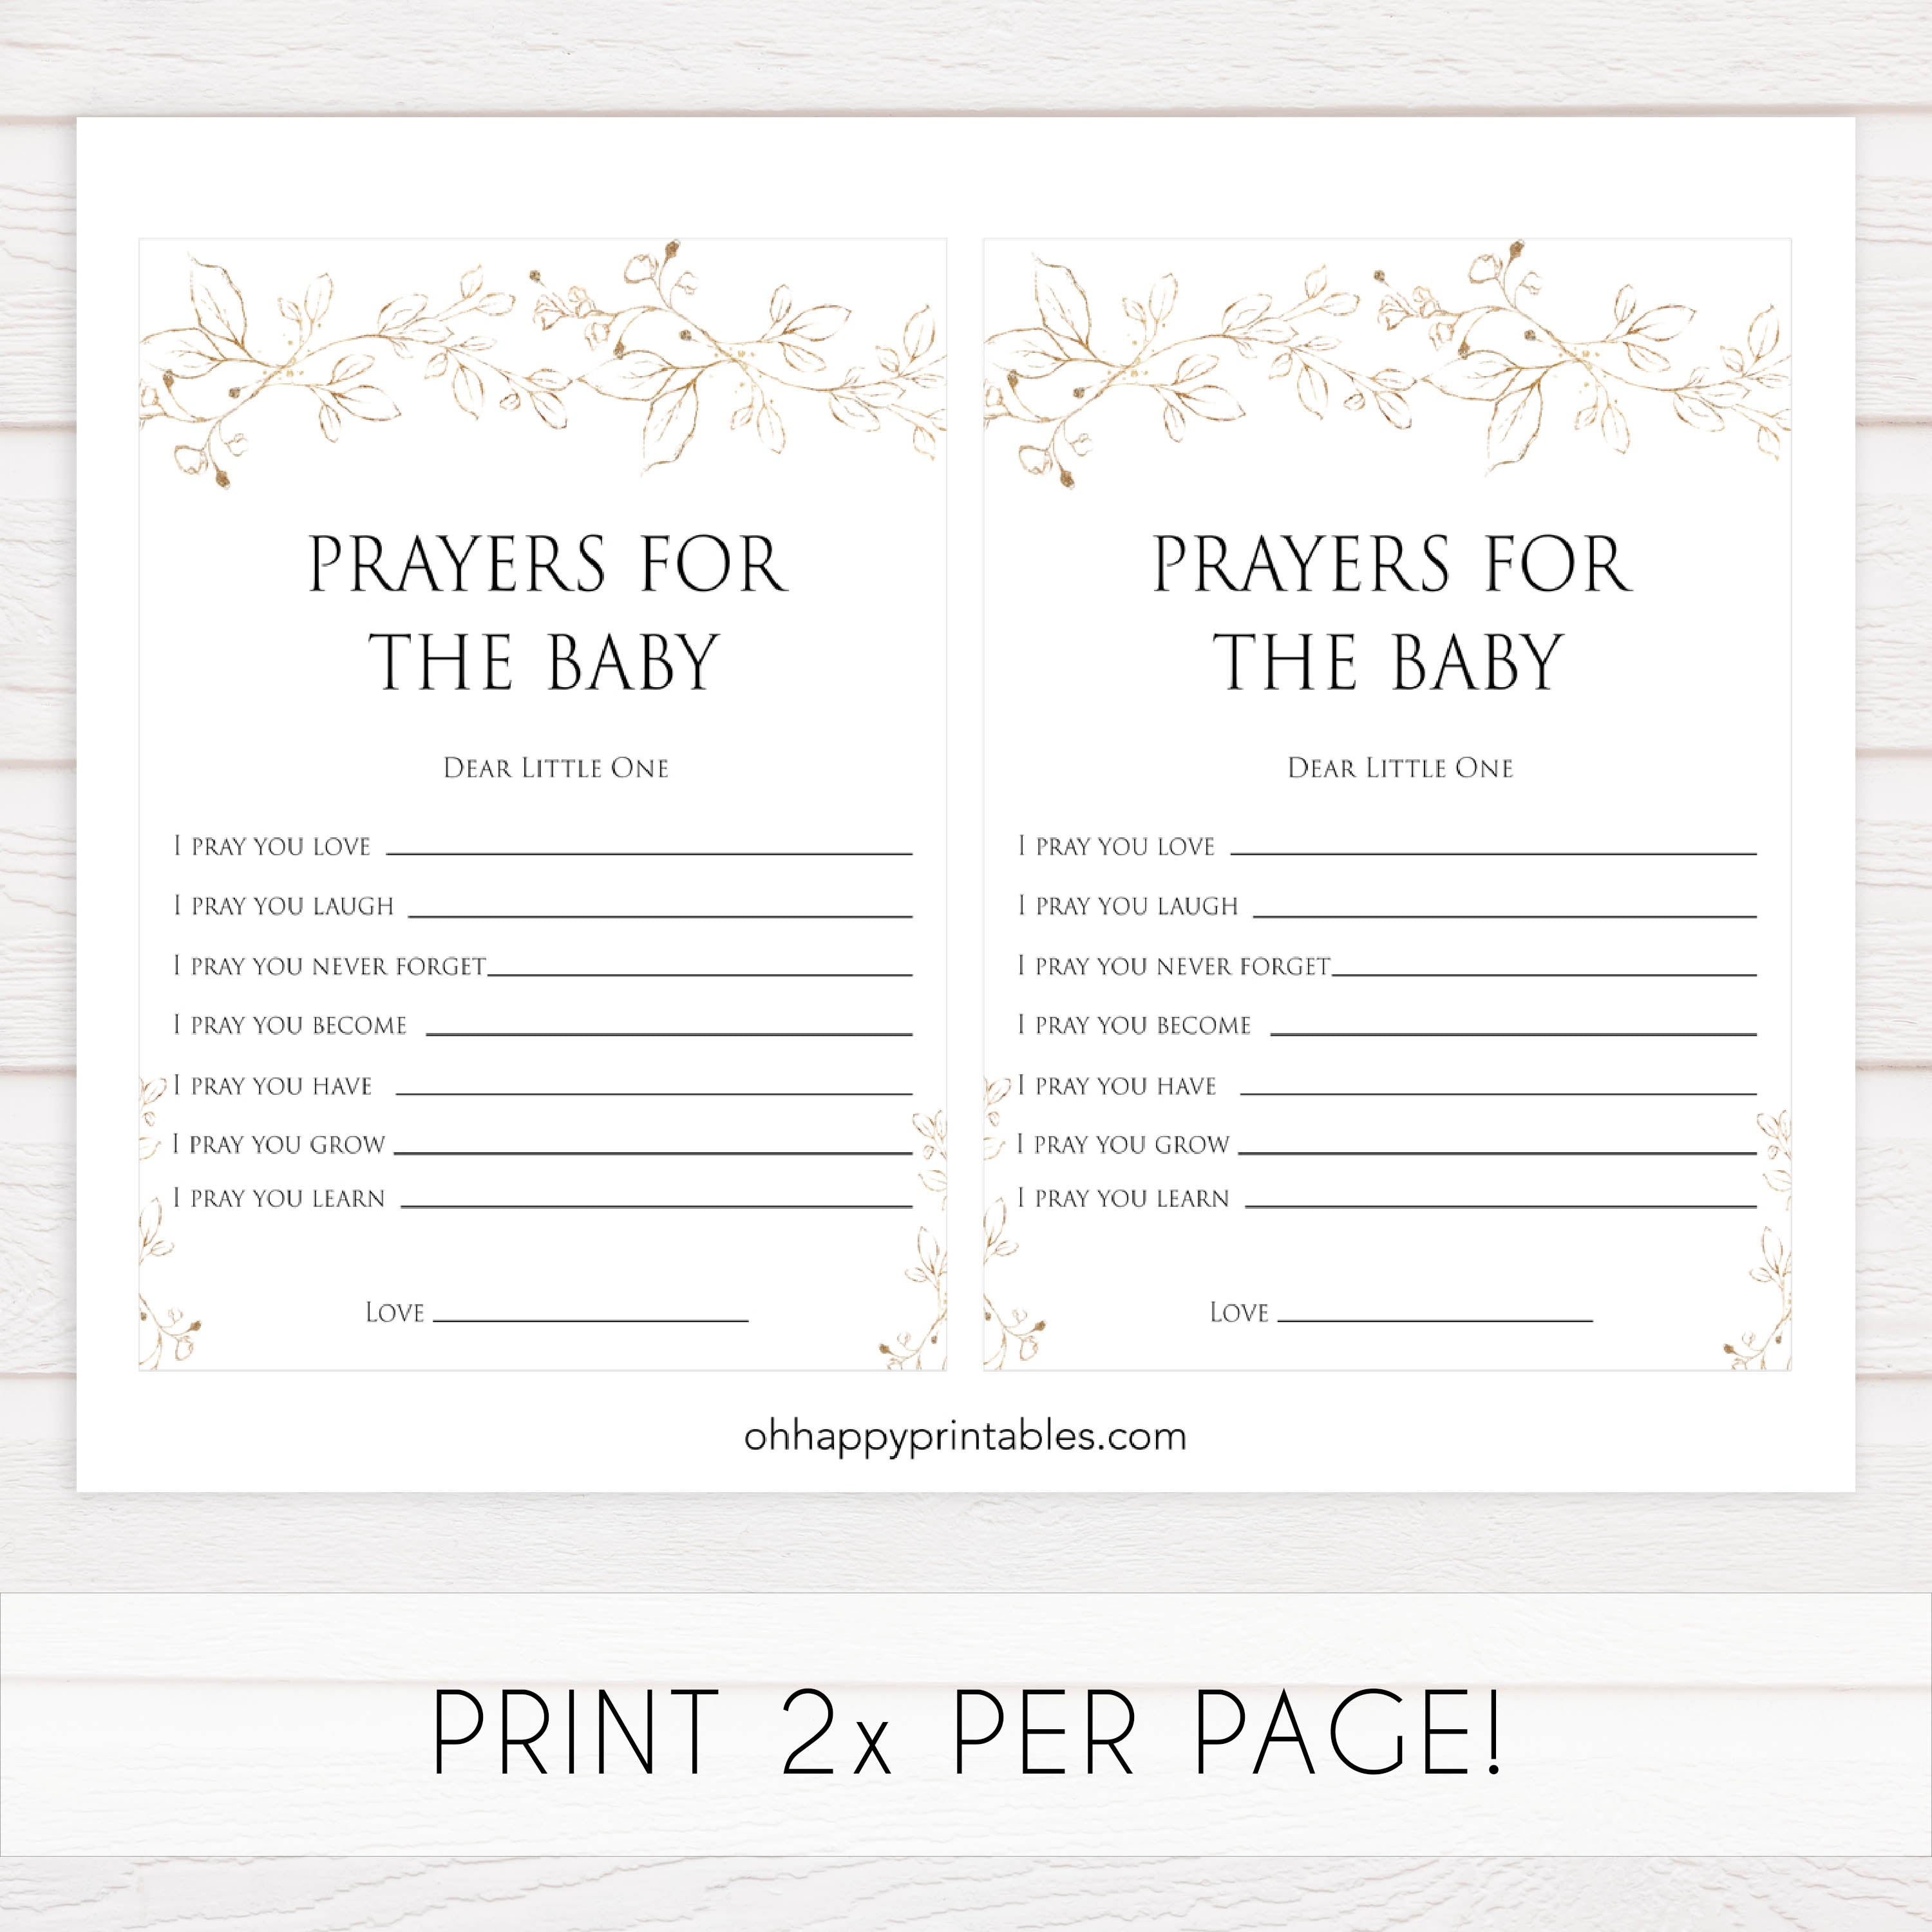 prayers for the baby game, Printable baby shower games, gold leaf baby games, baby shower games, fun baby shower ideas, top baby shower ideas, gold leaf baby shower, baby shower games, fun gold leaf baby shower ideas